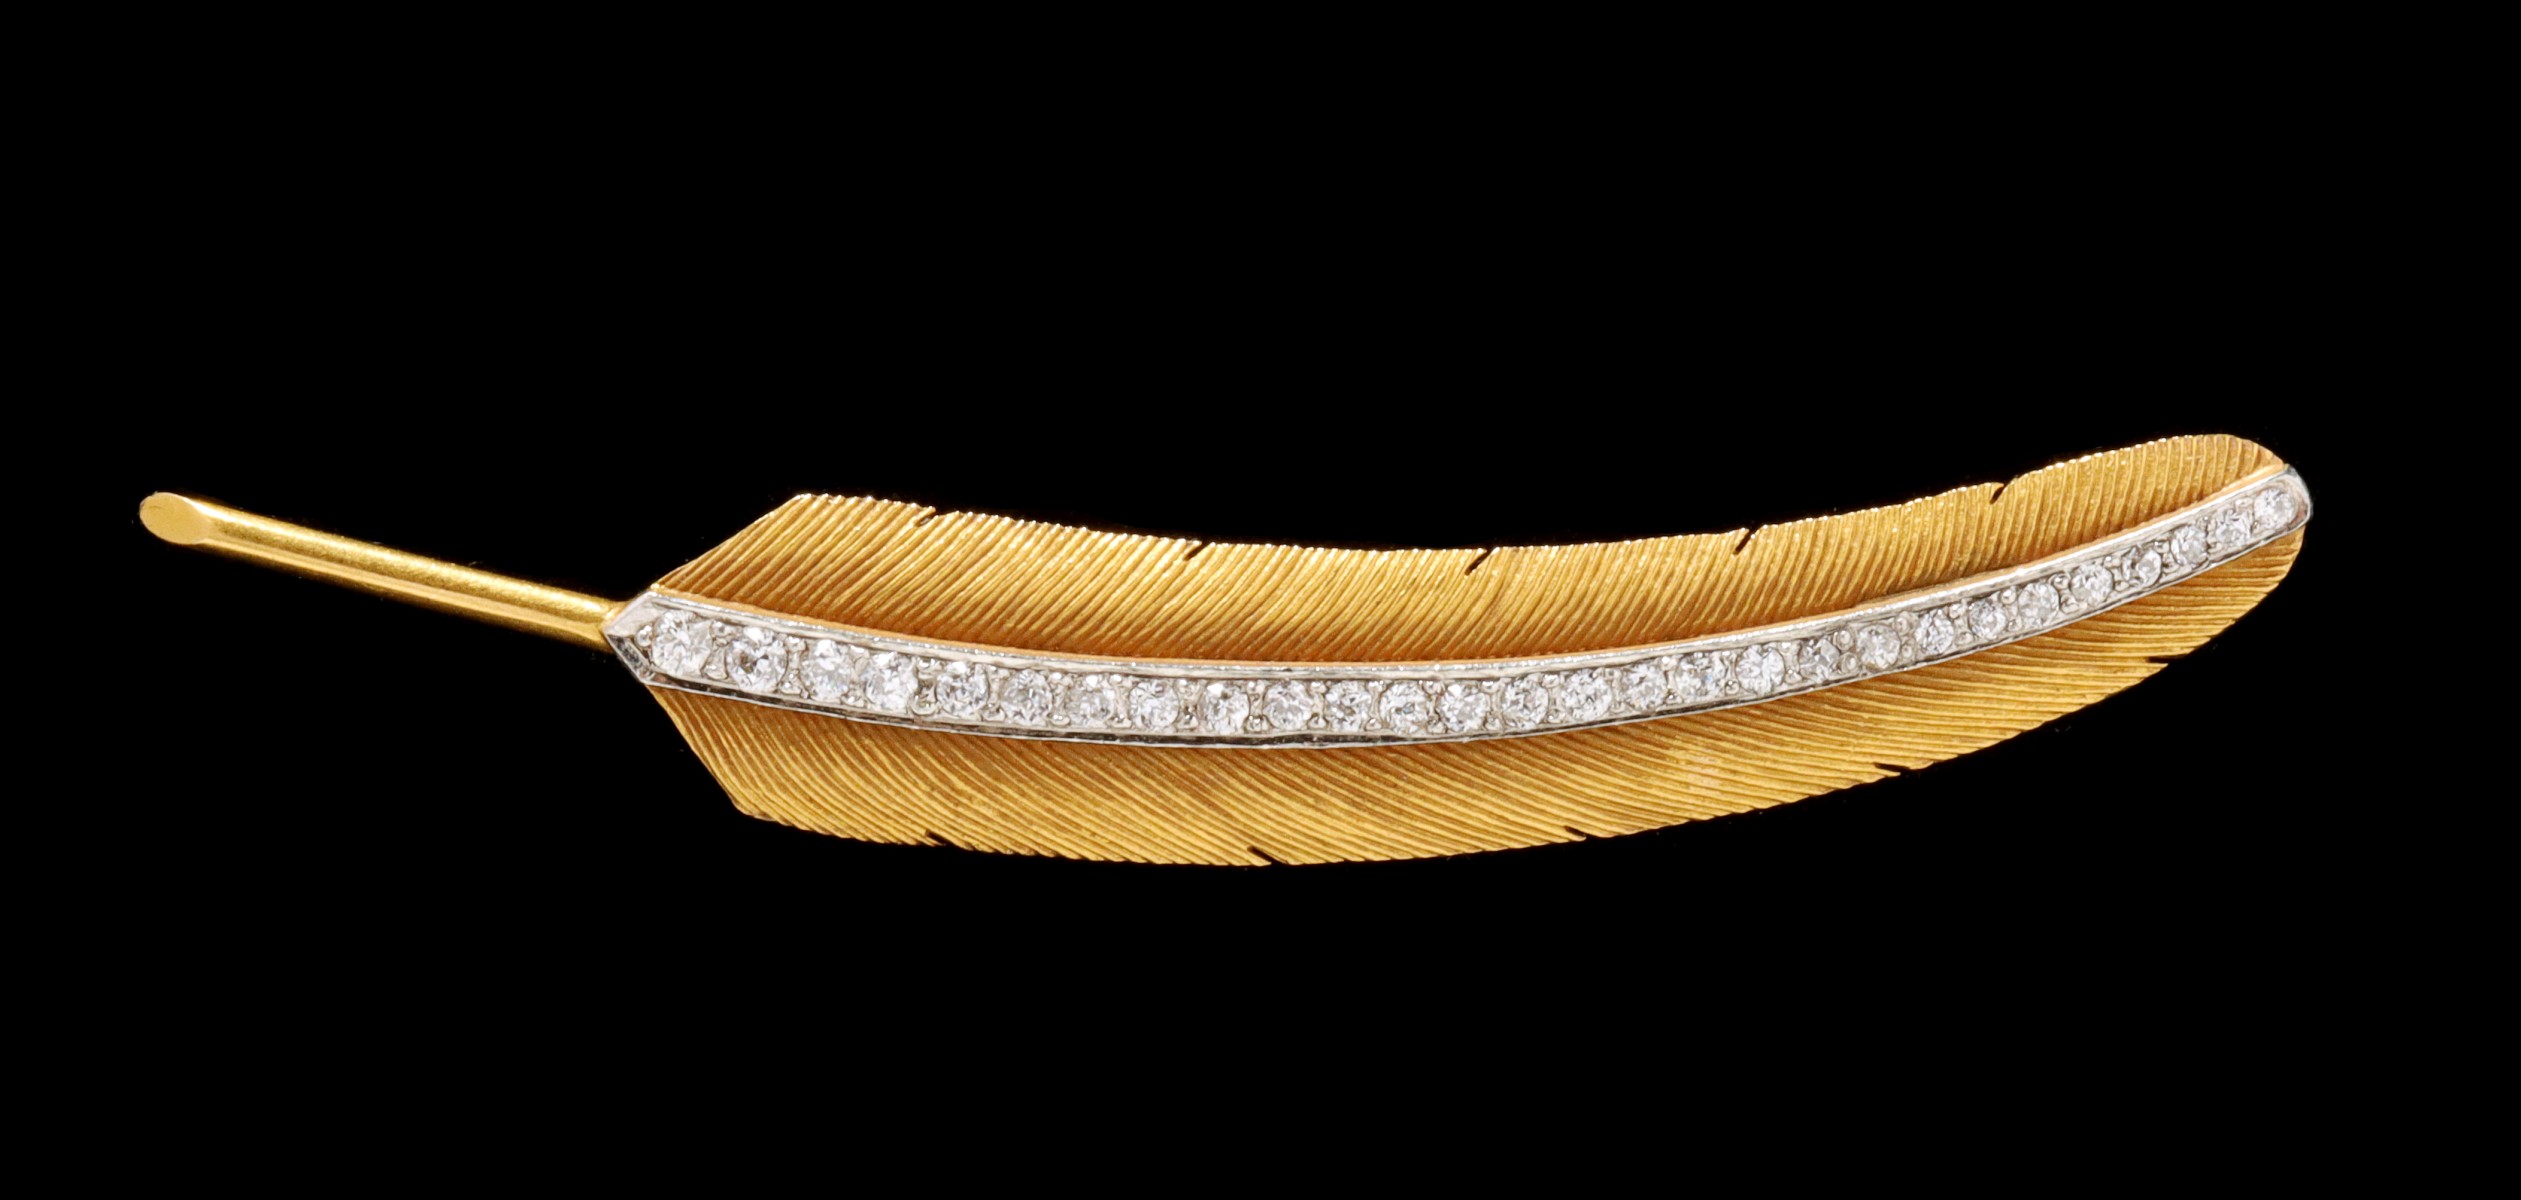 A WEINMAN BROTHERS 14K GOLD AND DIAMOND FEATHER BROOCH